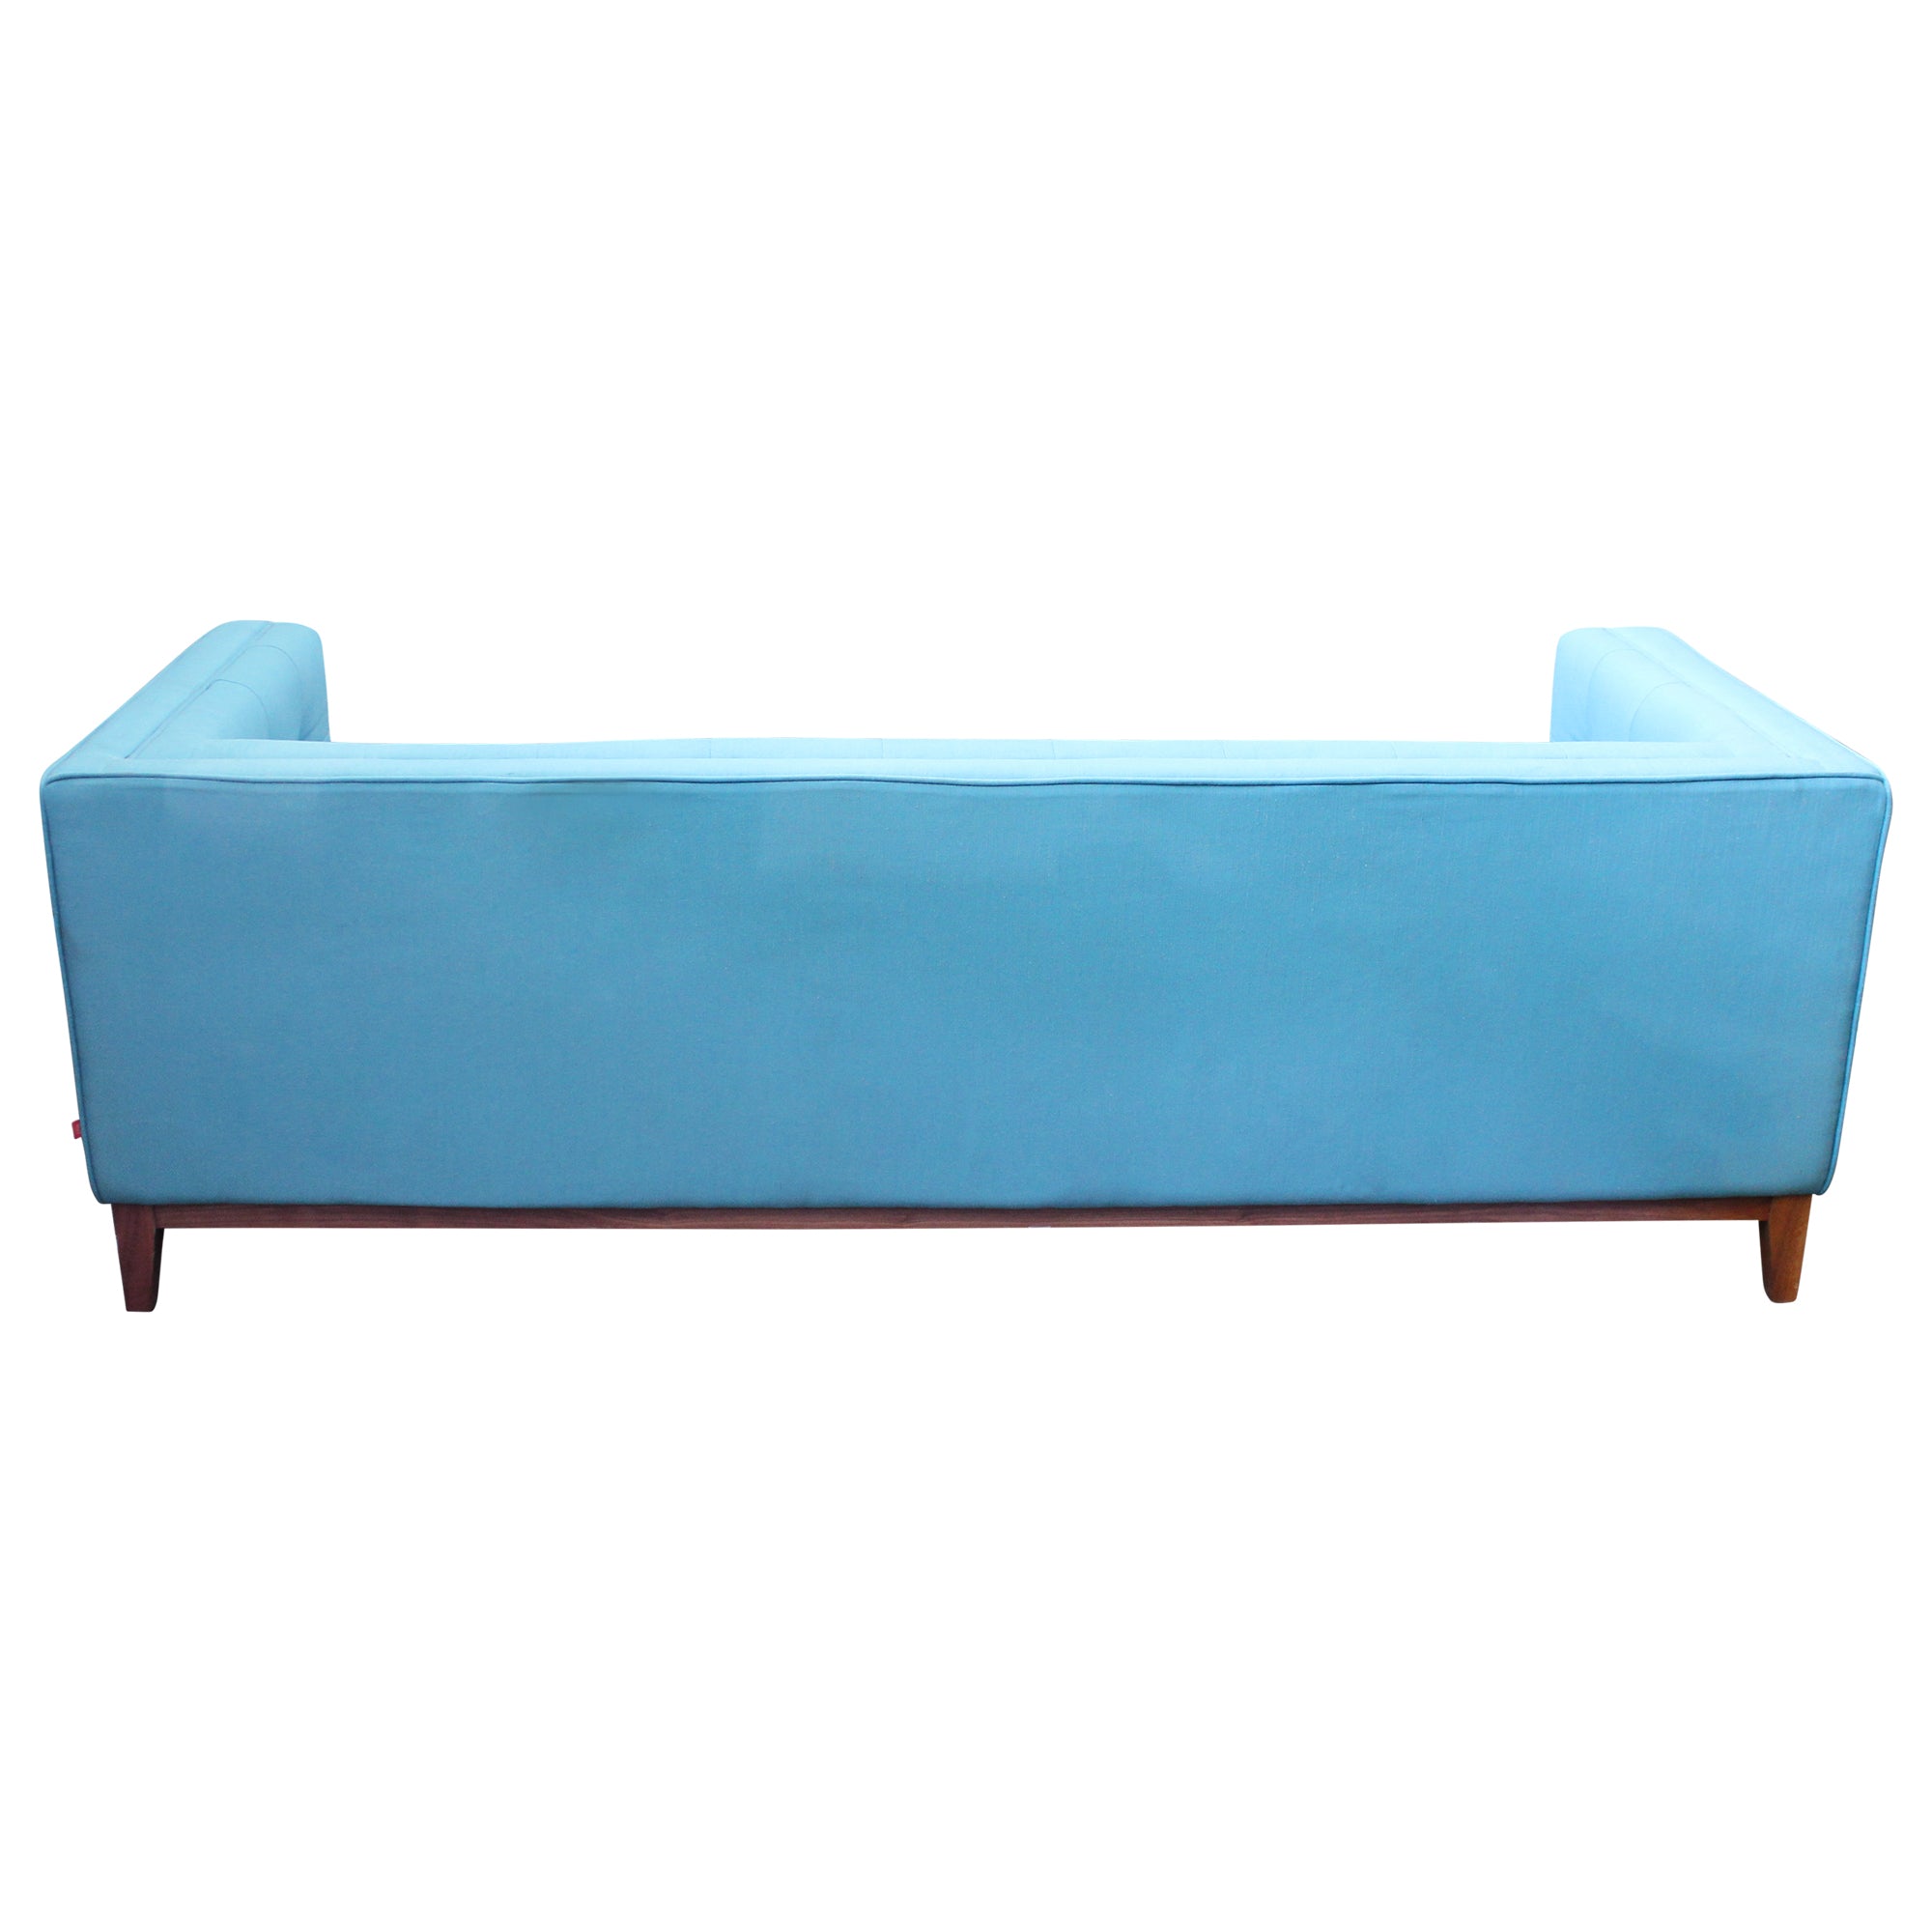 Gus Modern Atwood Sofa - Blue - Preowned